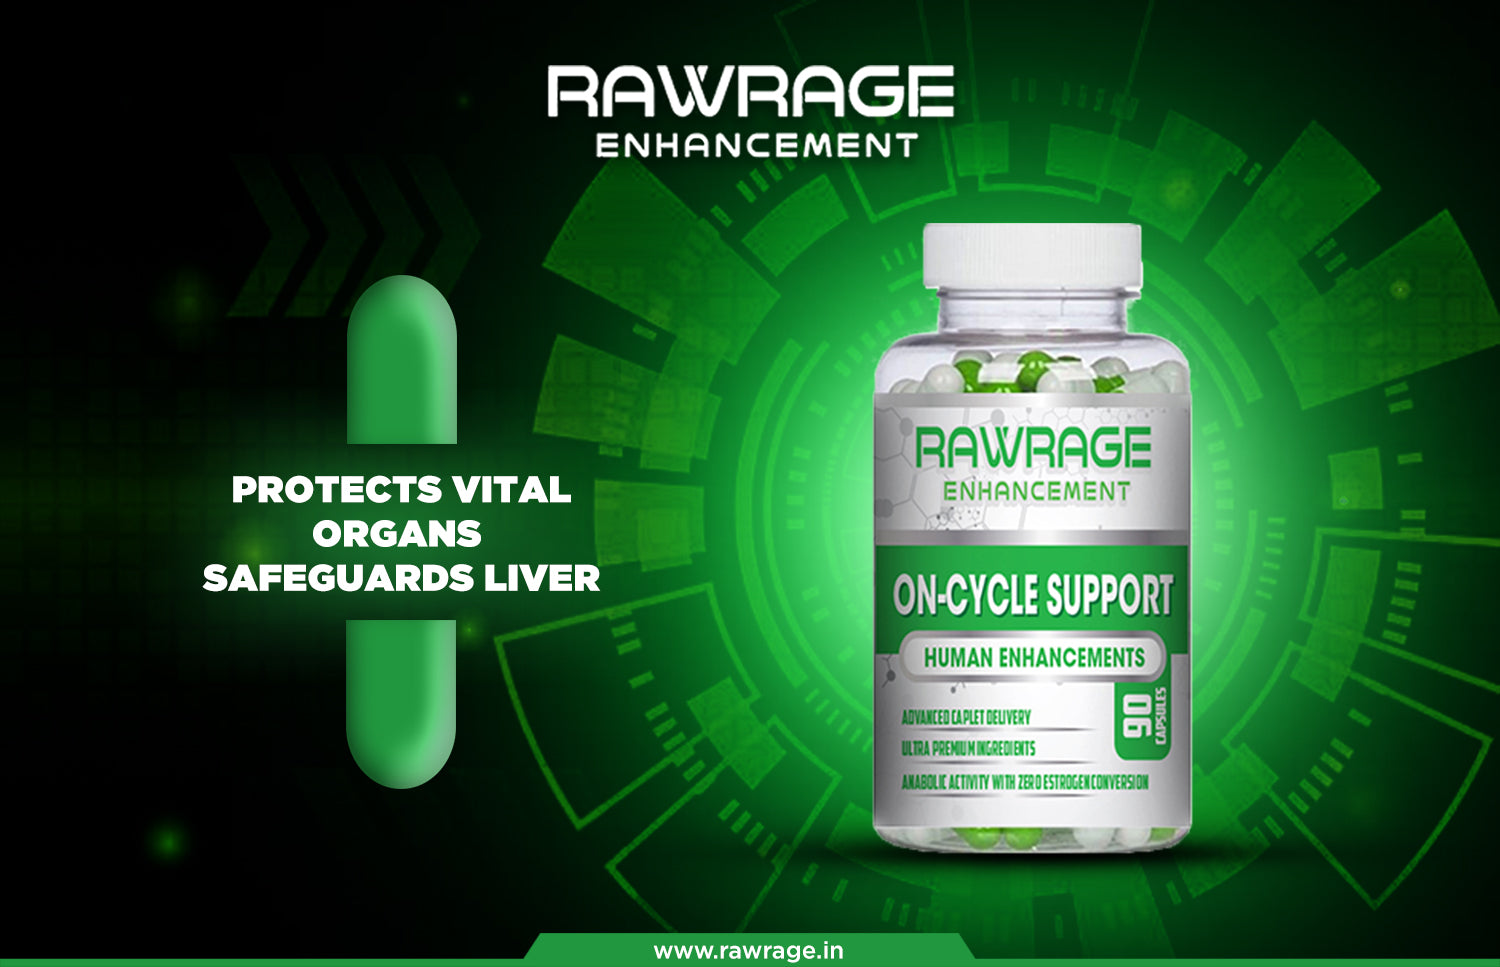 RawRage On-Cycle Support l Organ Safe Guard & Protection